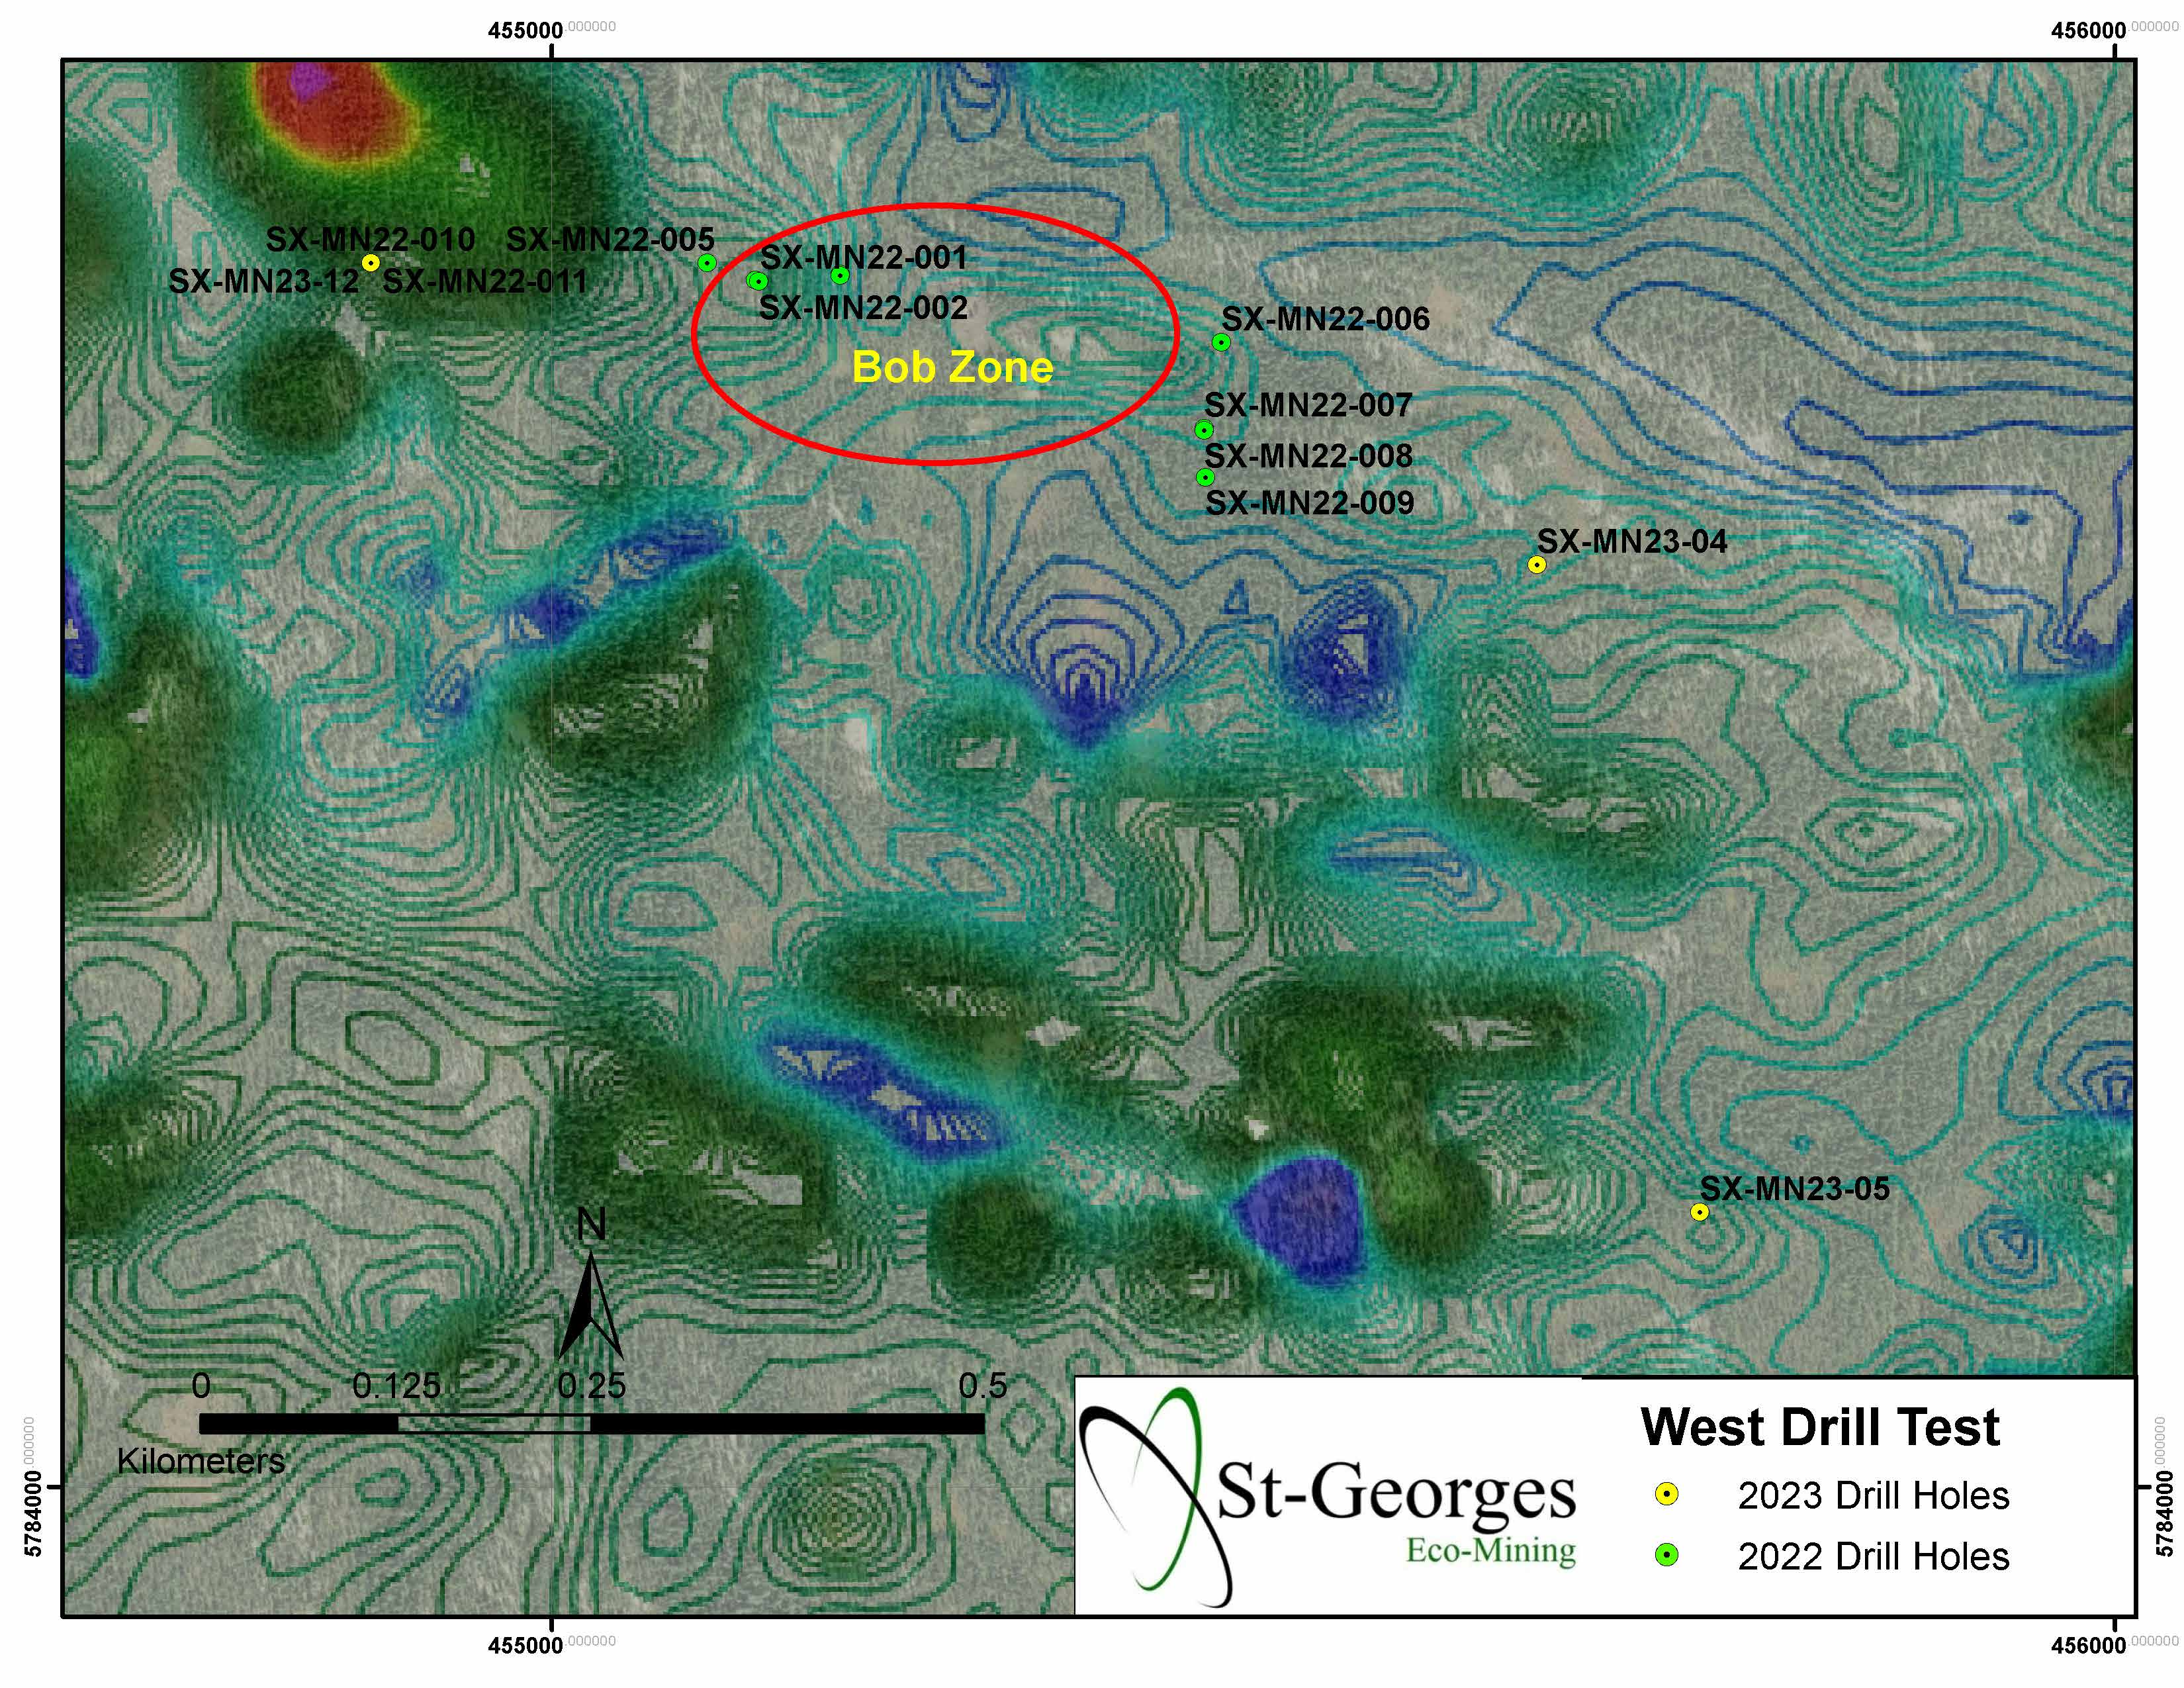 St-Georges Eco-Mining Corp., Tuesday, May 16, 2023, Press release picture